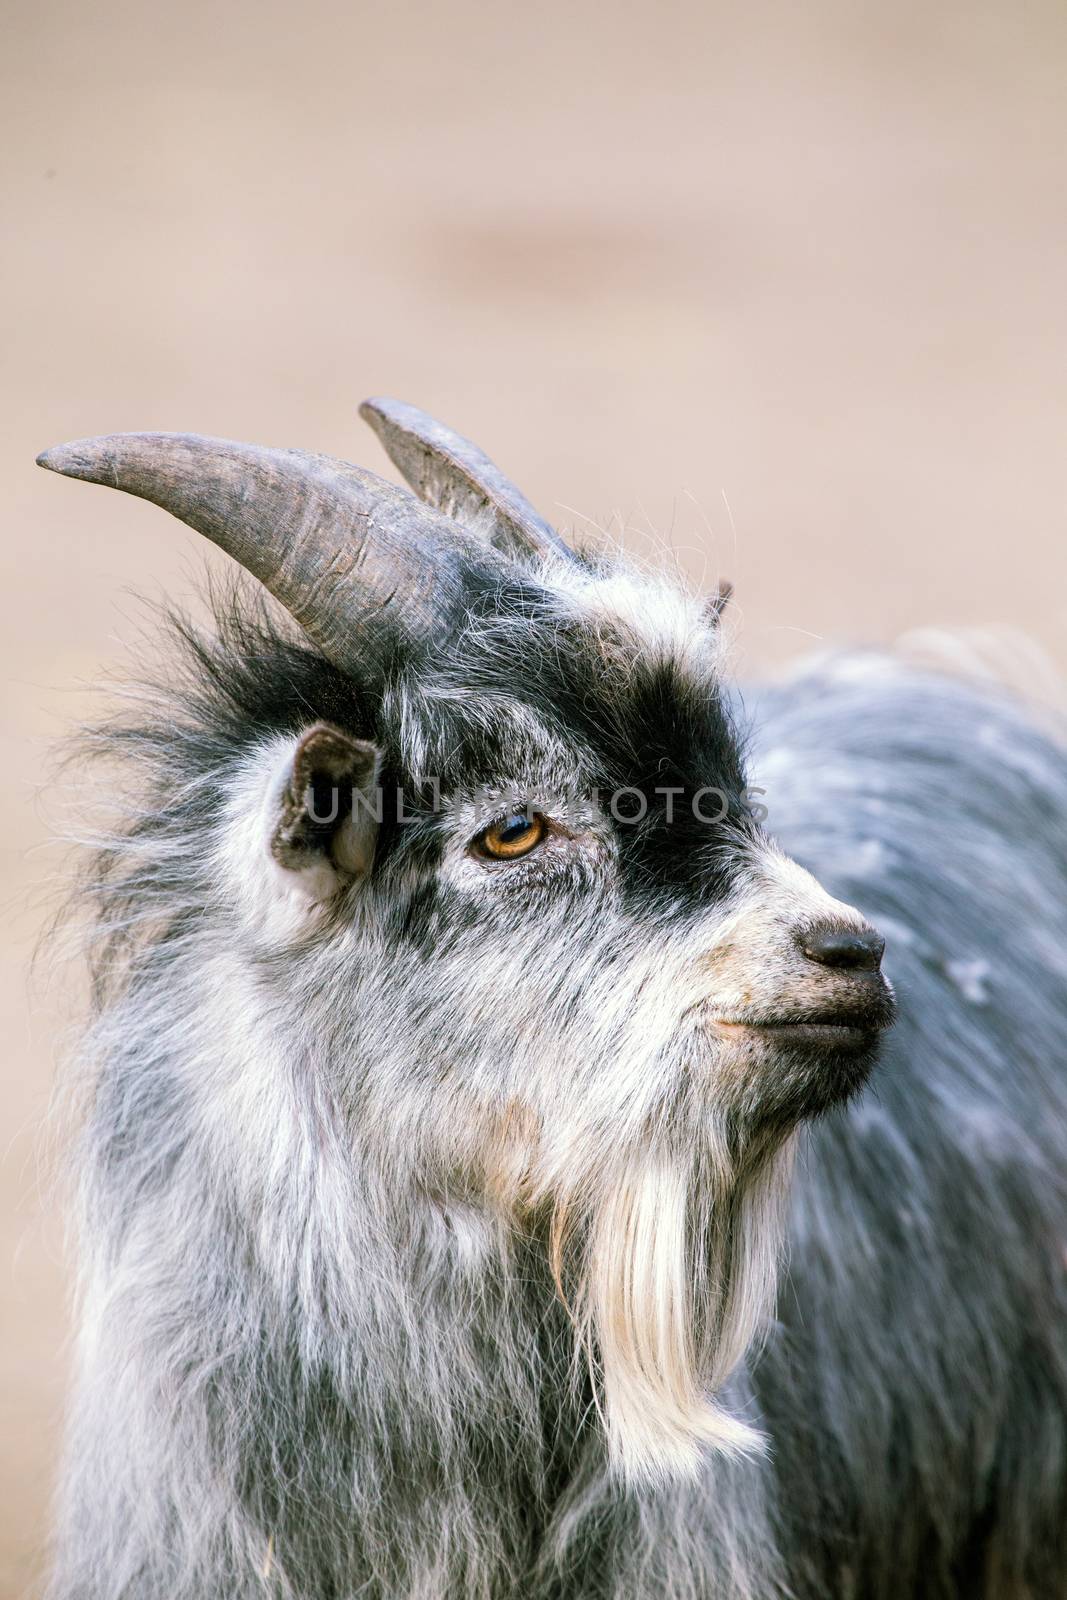 Goat by thomas_males